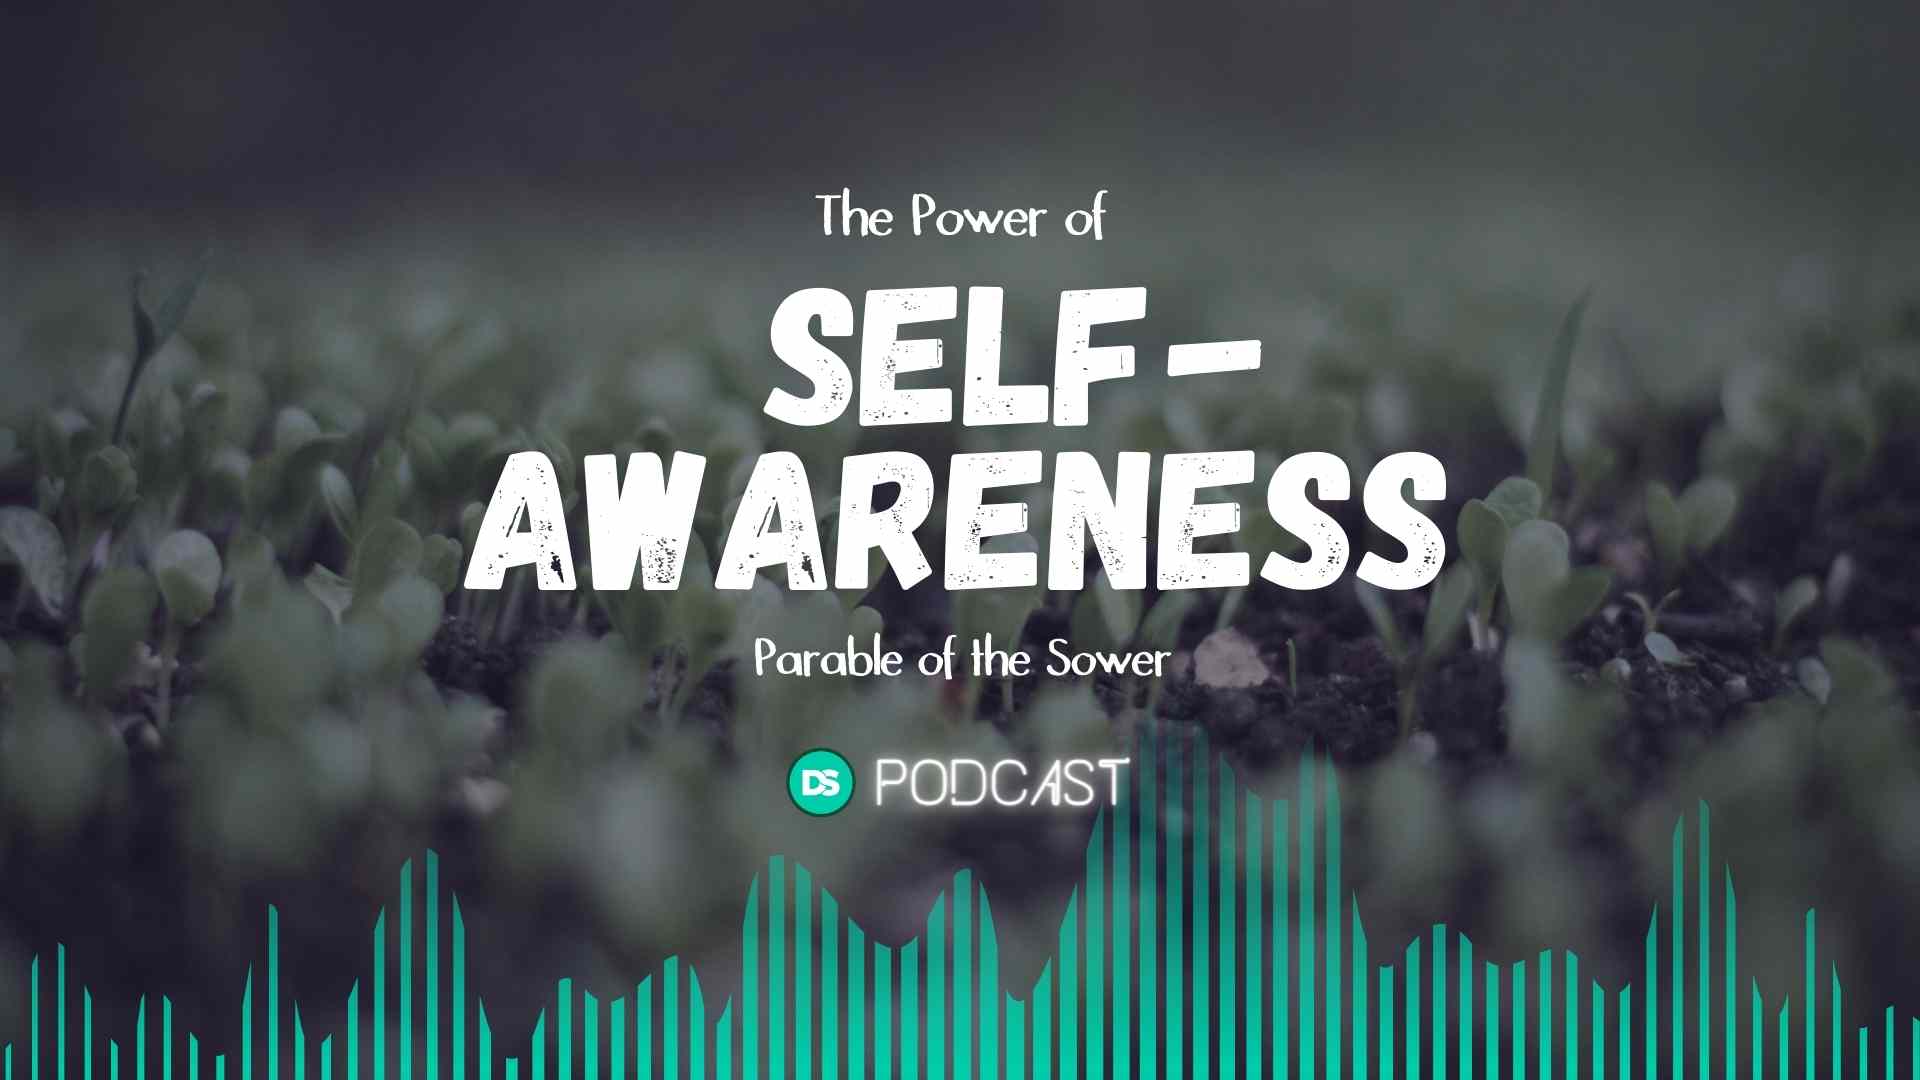 The Parable of the Sower and the Power of Self-Awareness 1